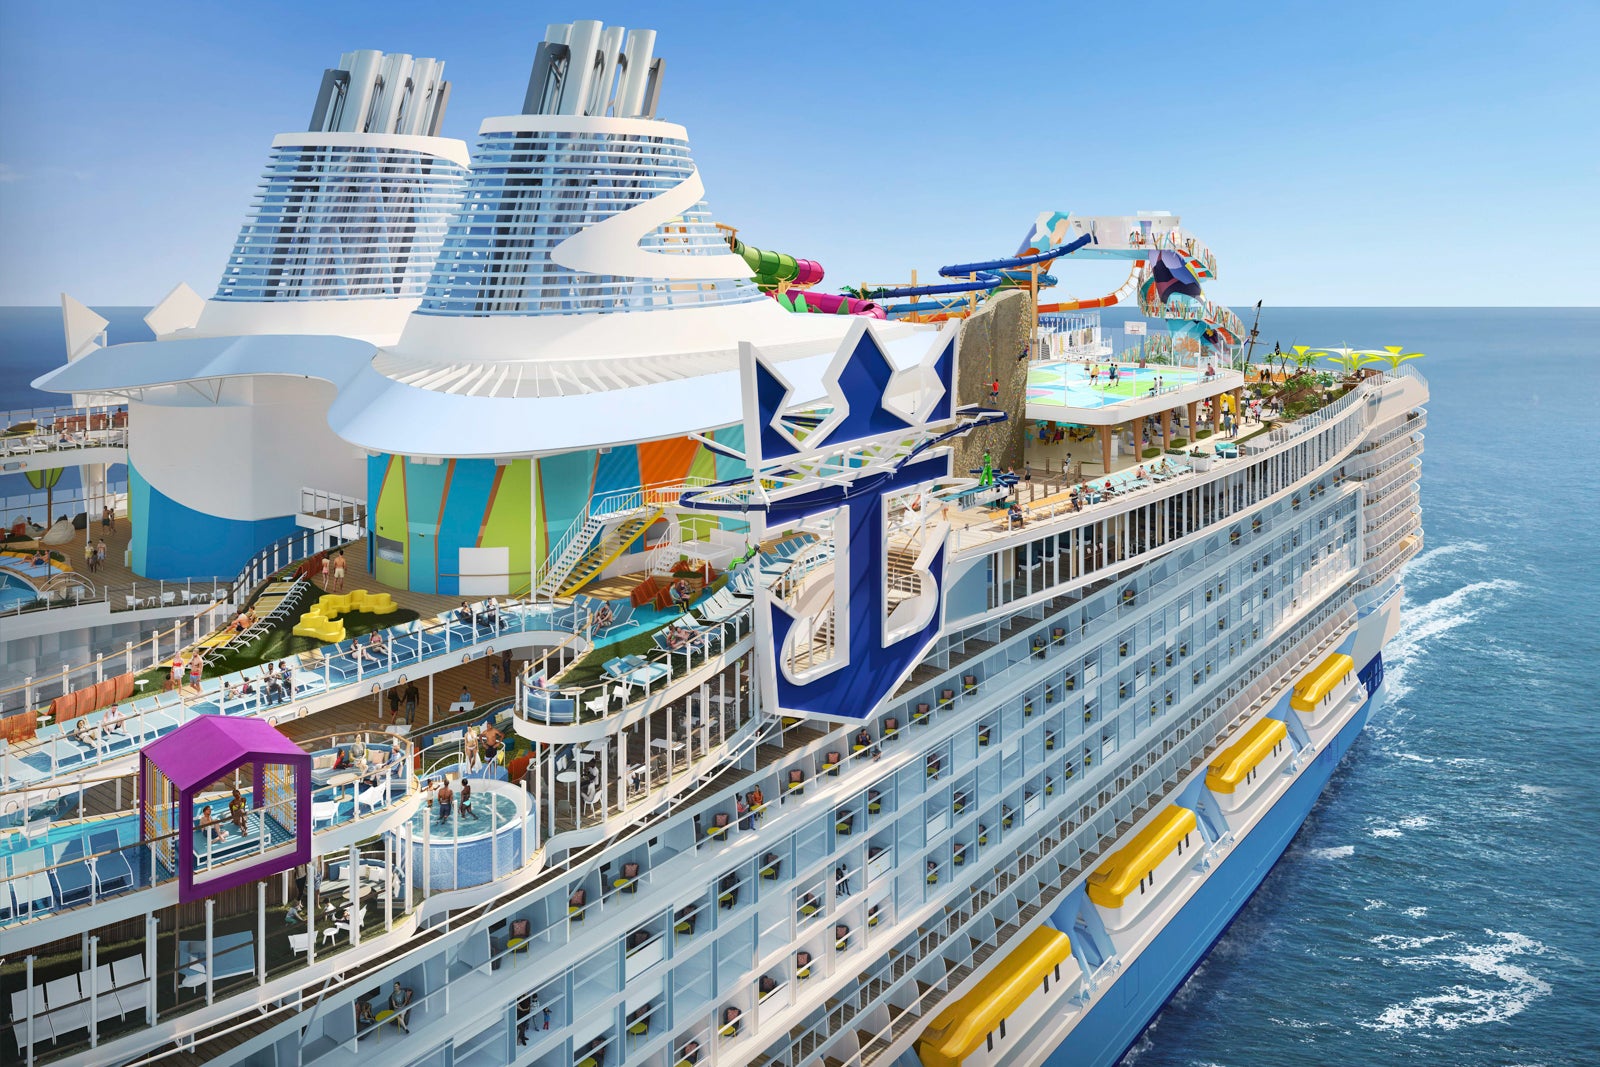 Bookings on fire: Demand for Royal Caribbean’s new Icon of the Seas is like nothing the line has ever seen